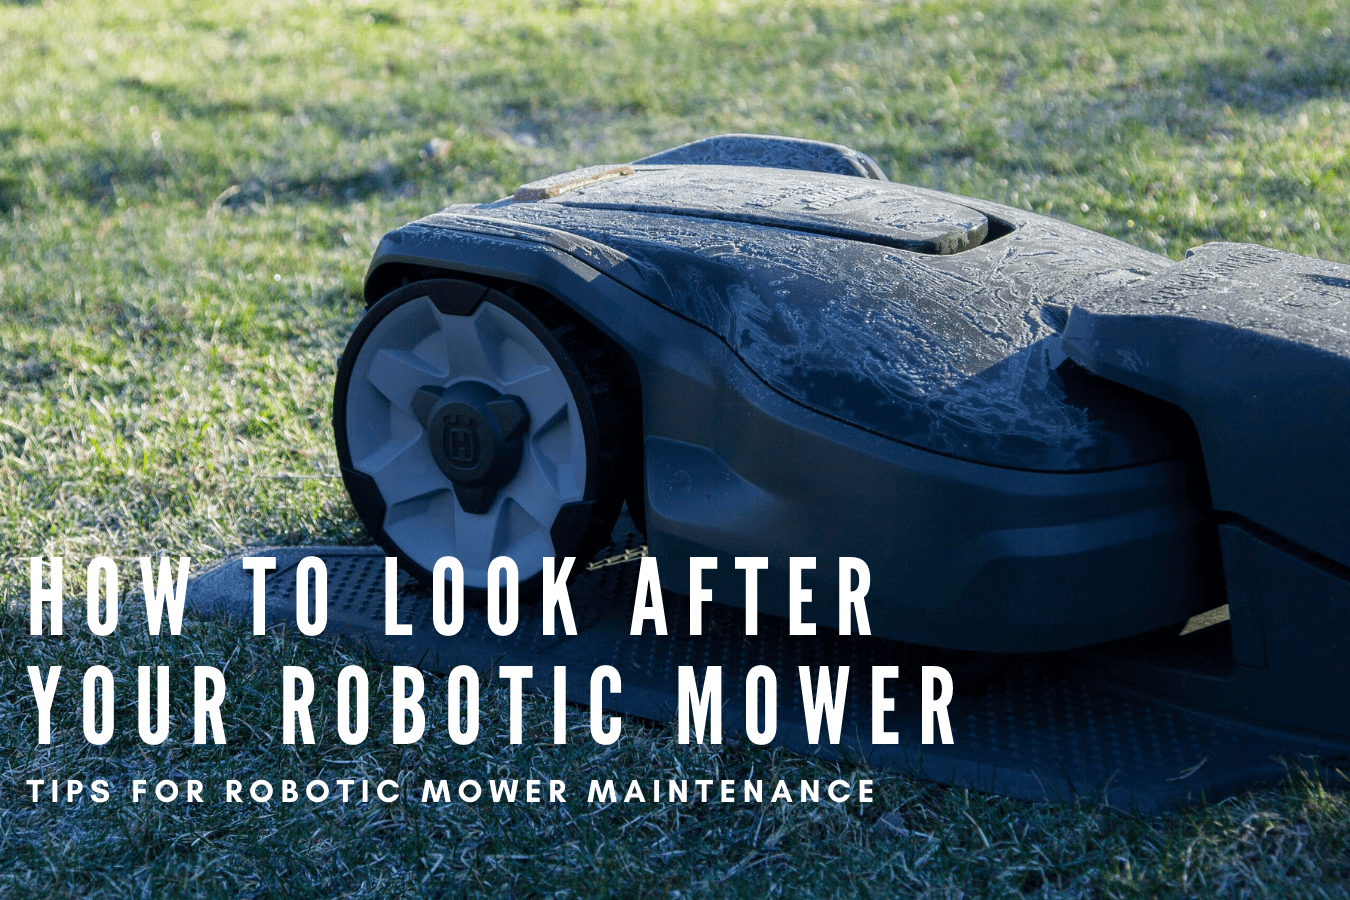 How to look after your Robotic Mower: Tips for Robotic Mower maintenance